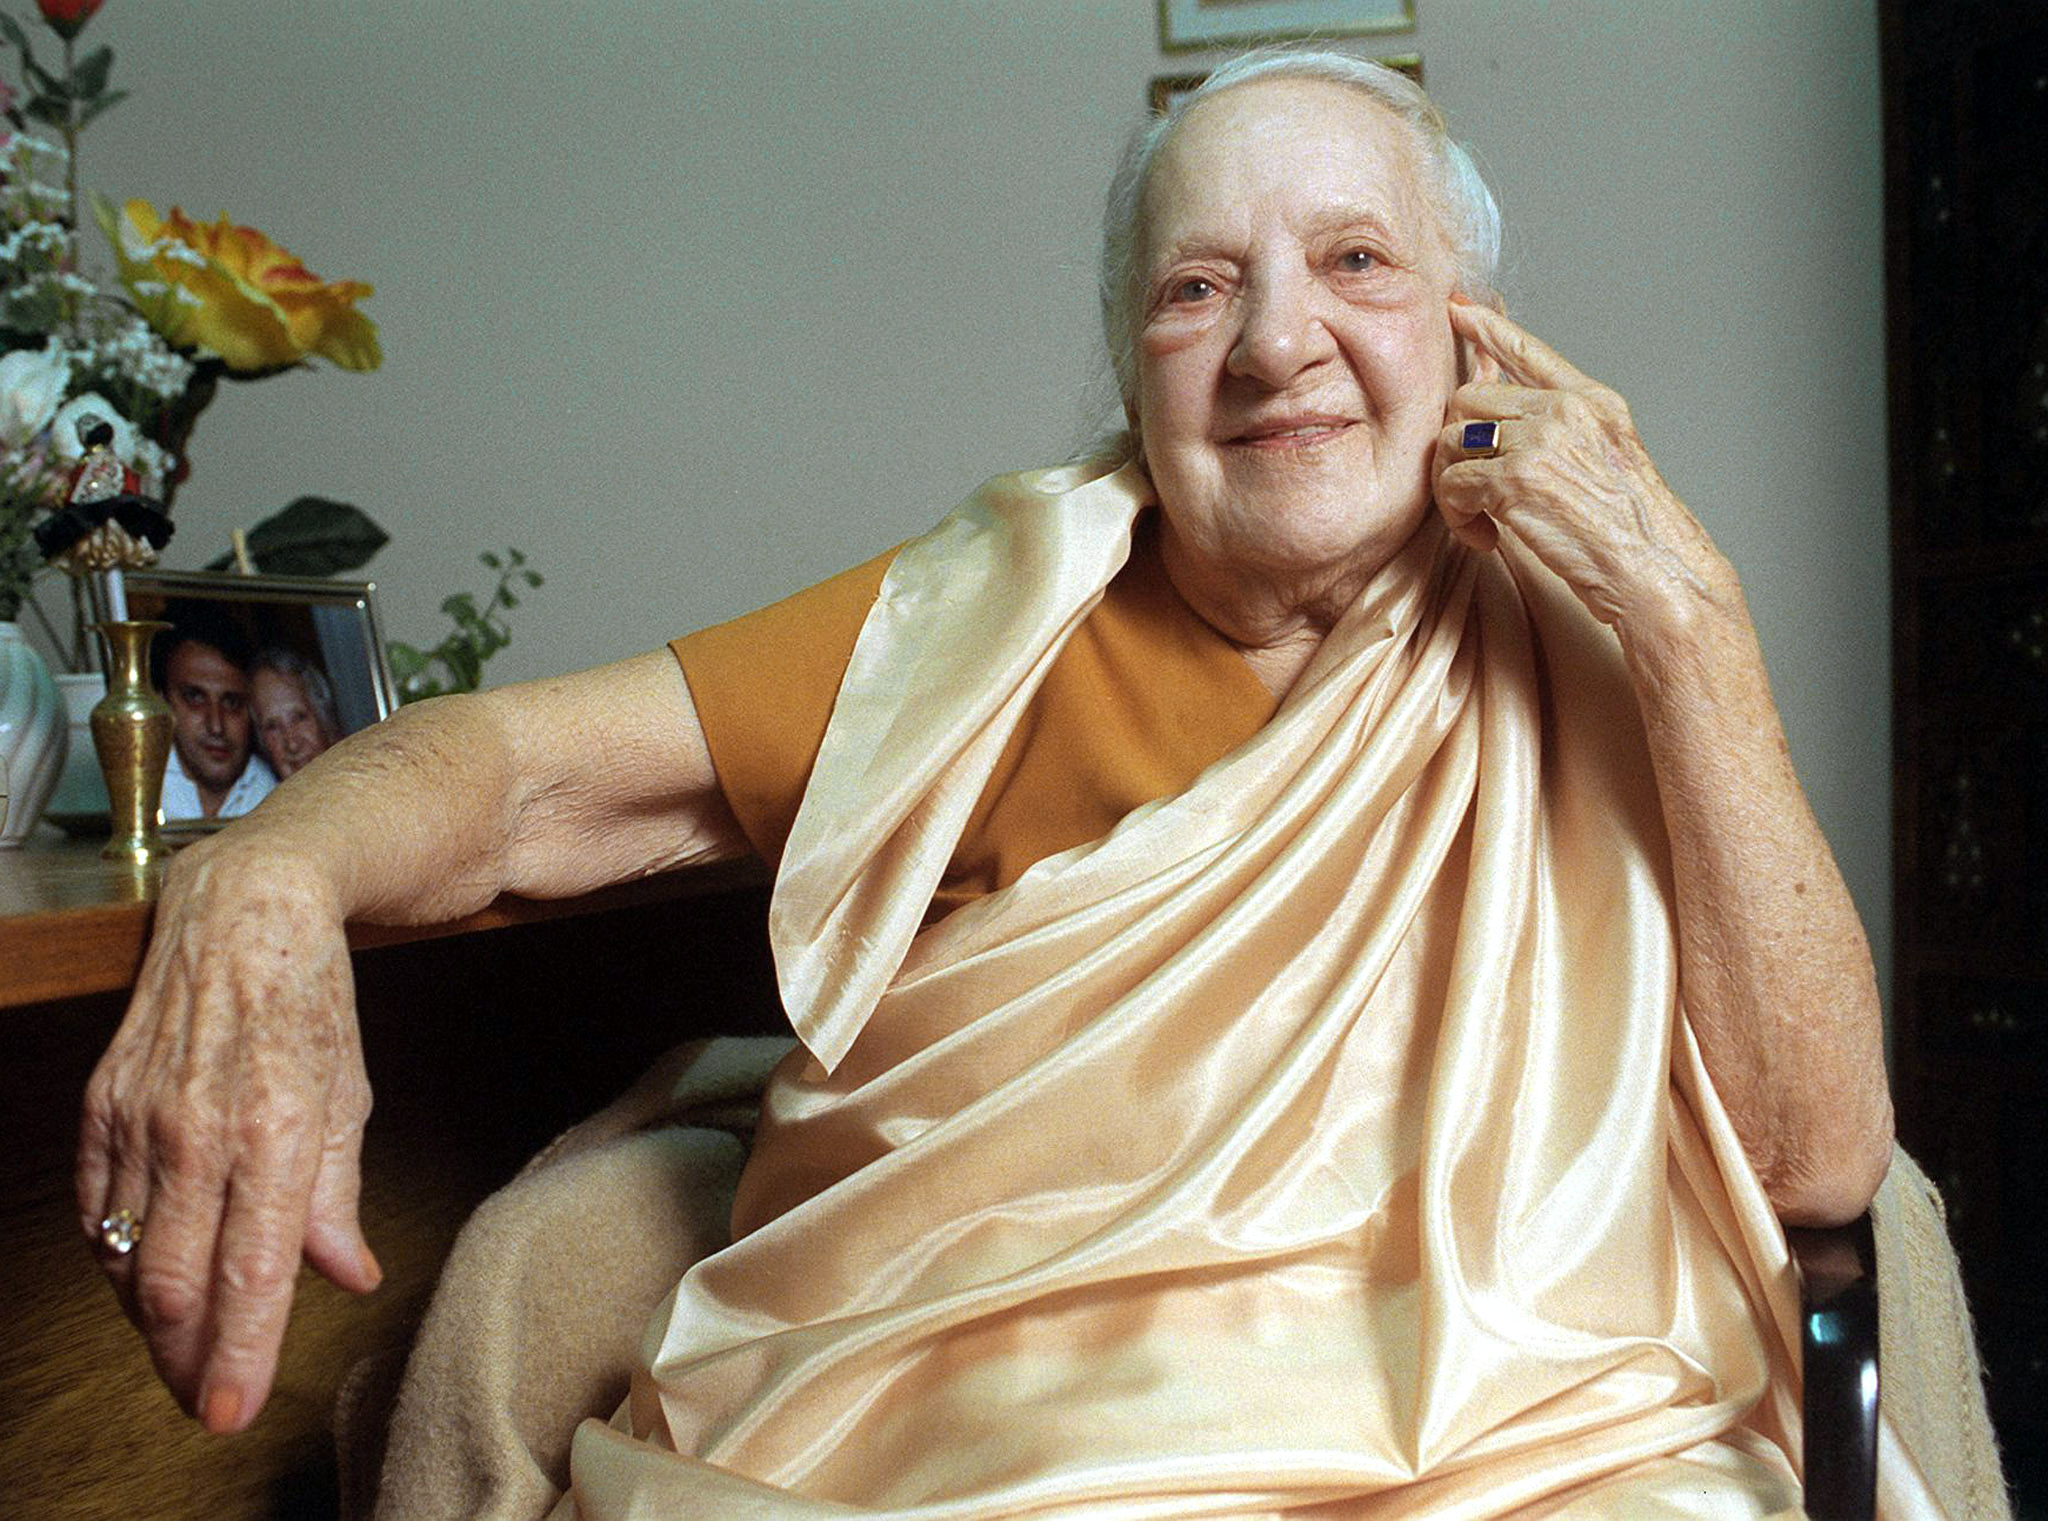 Indra Devi was known as the "First Lady of Yoga". Source: Reuters